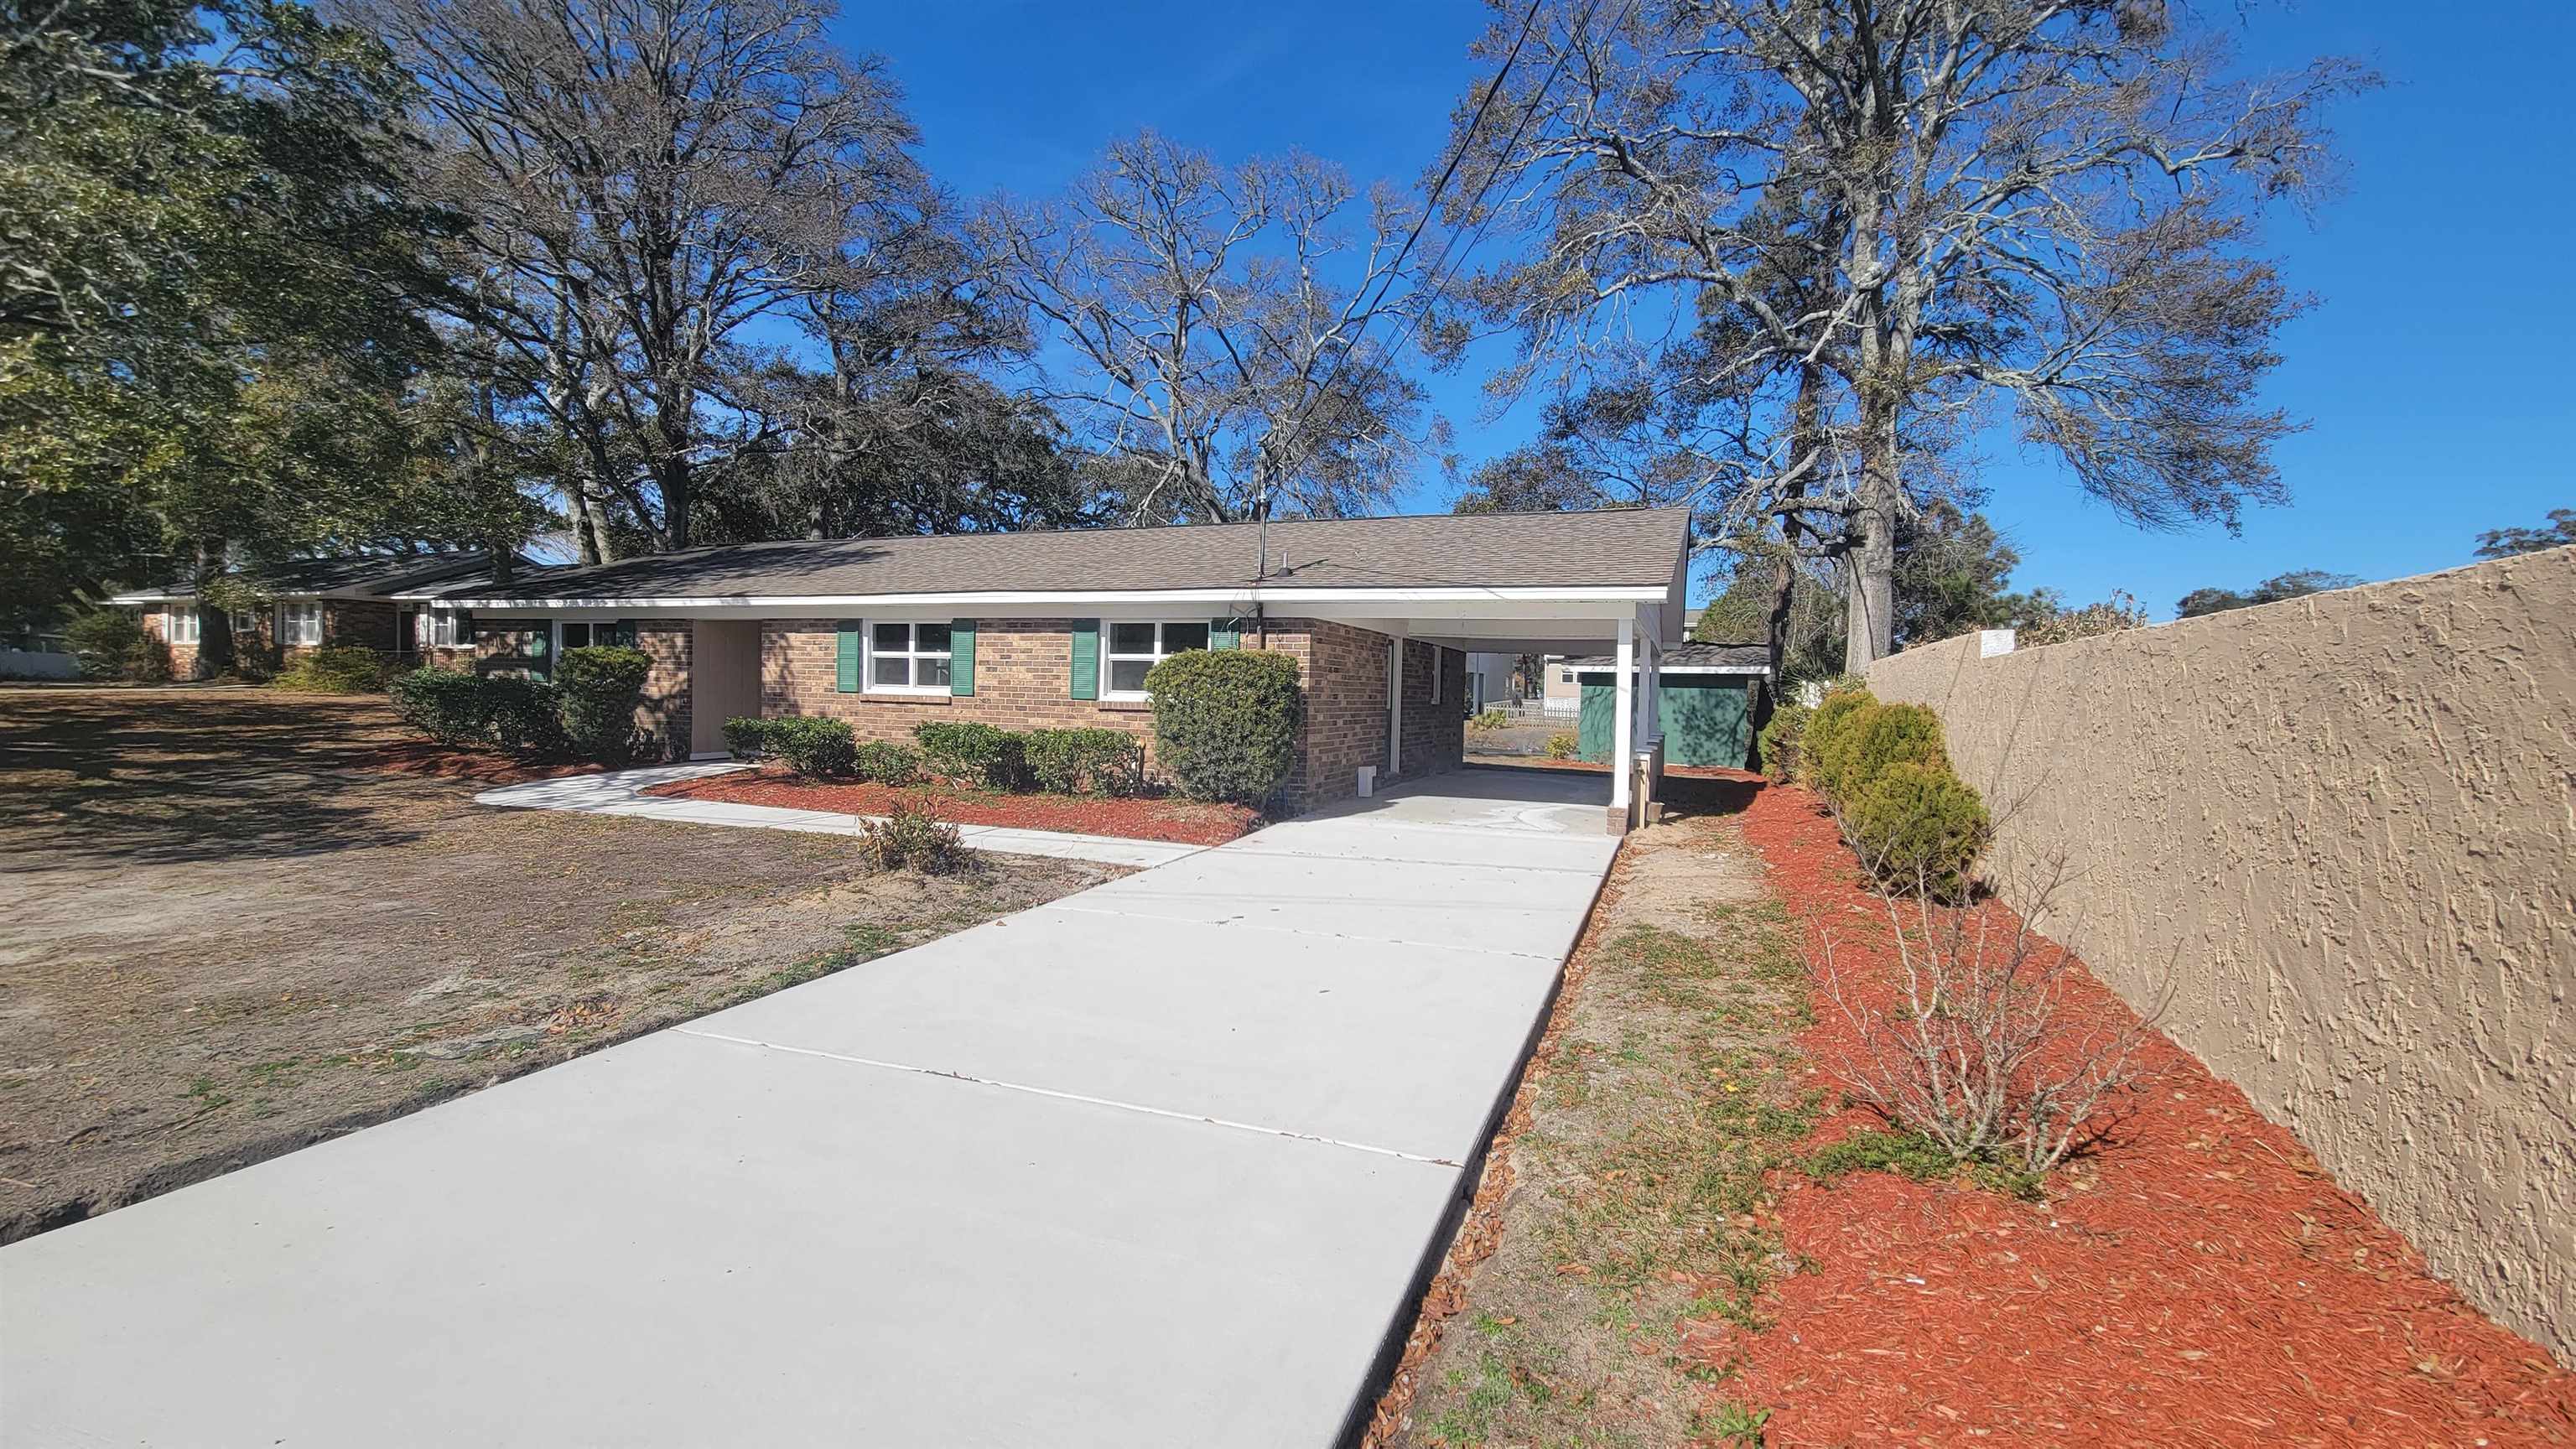 2307 Curley St. North Myrtle Beach, SC 29582